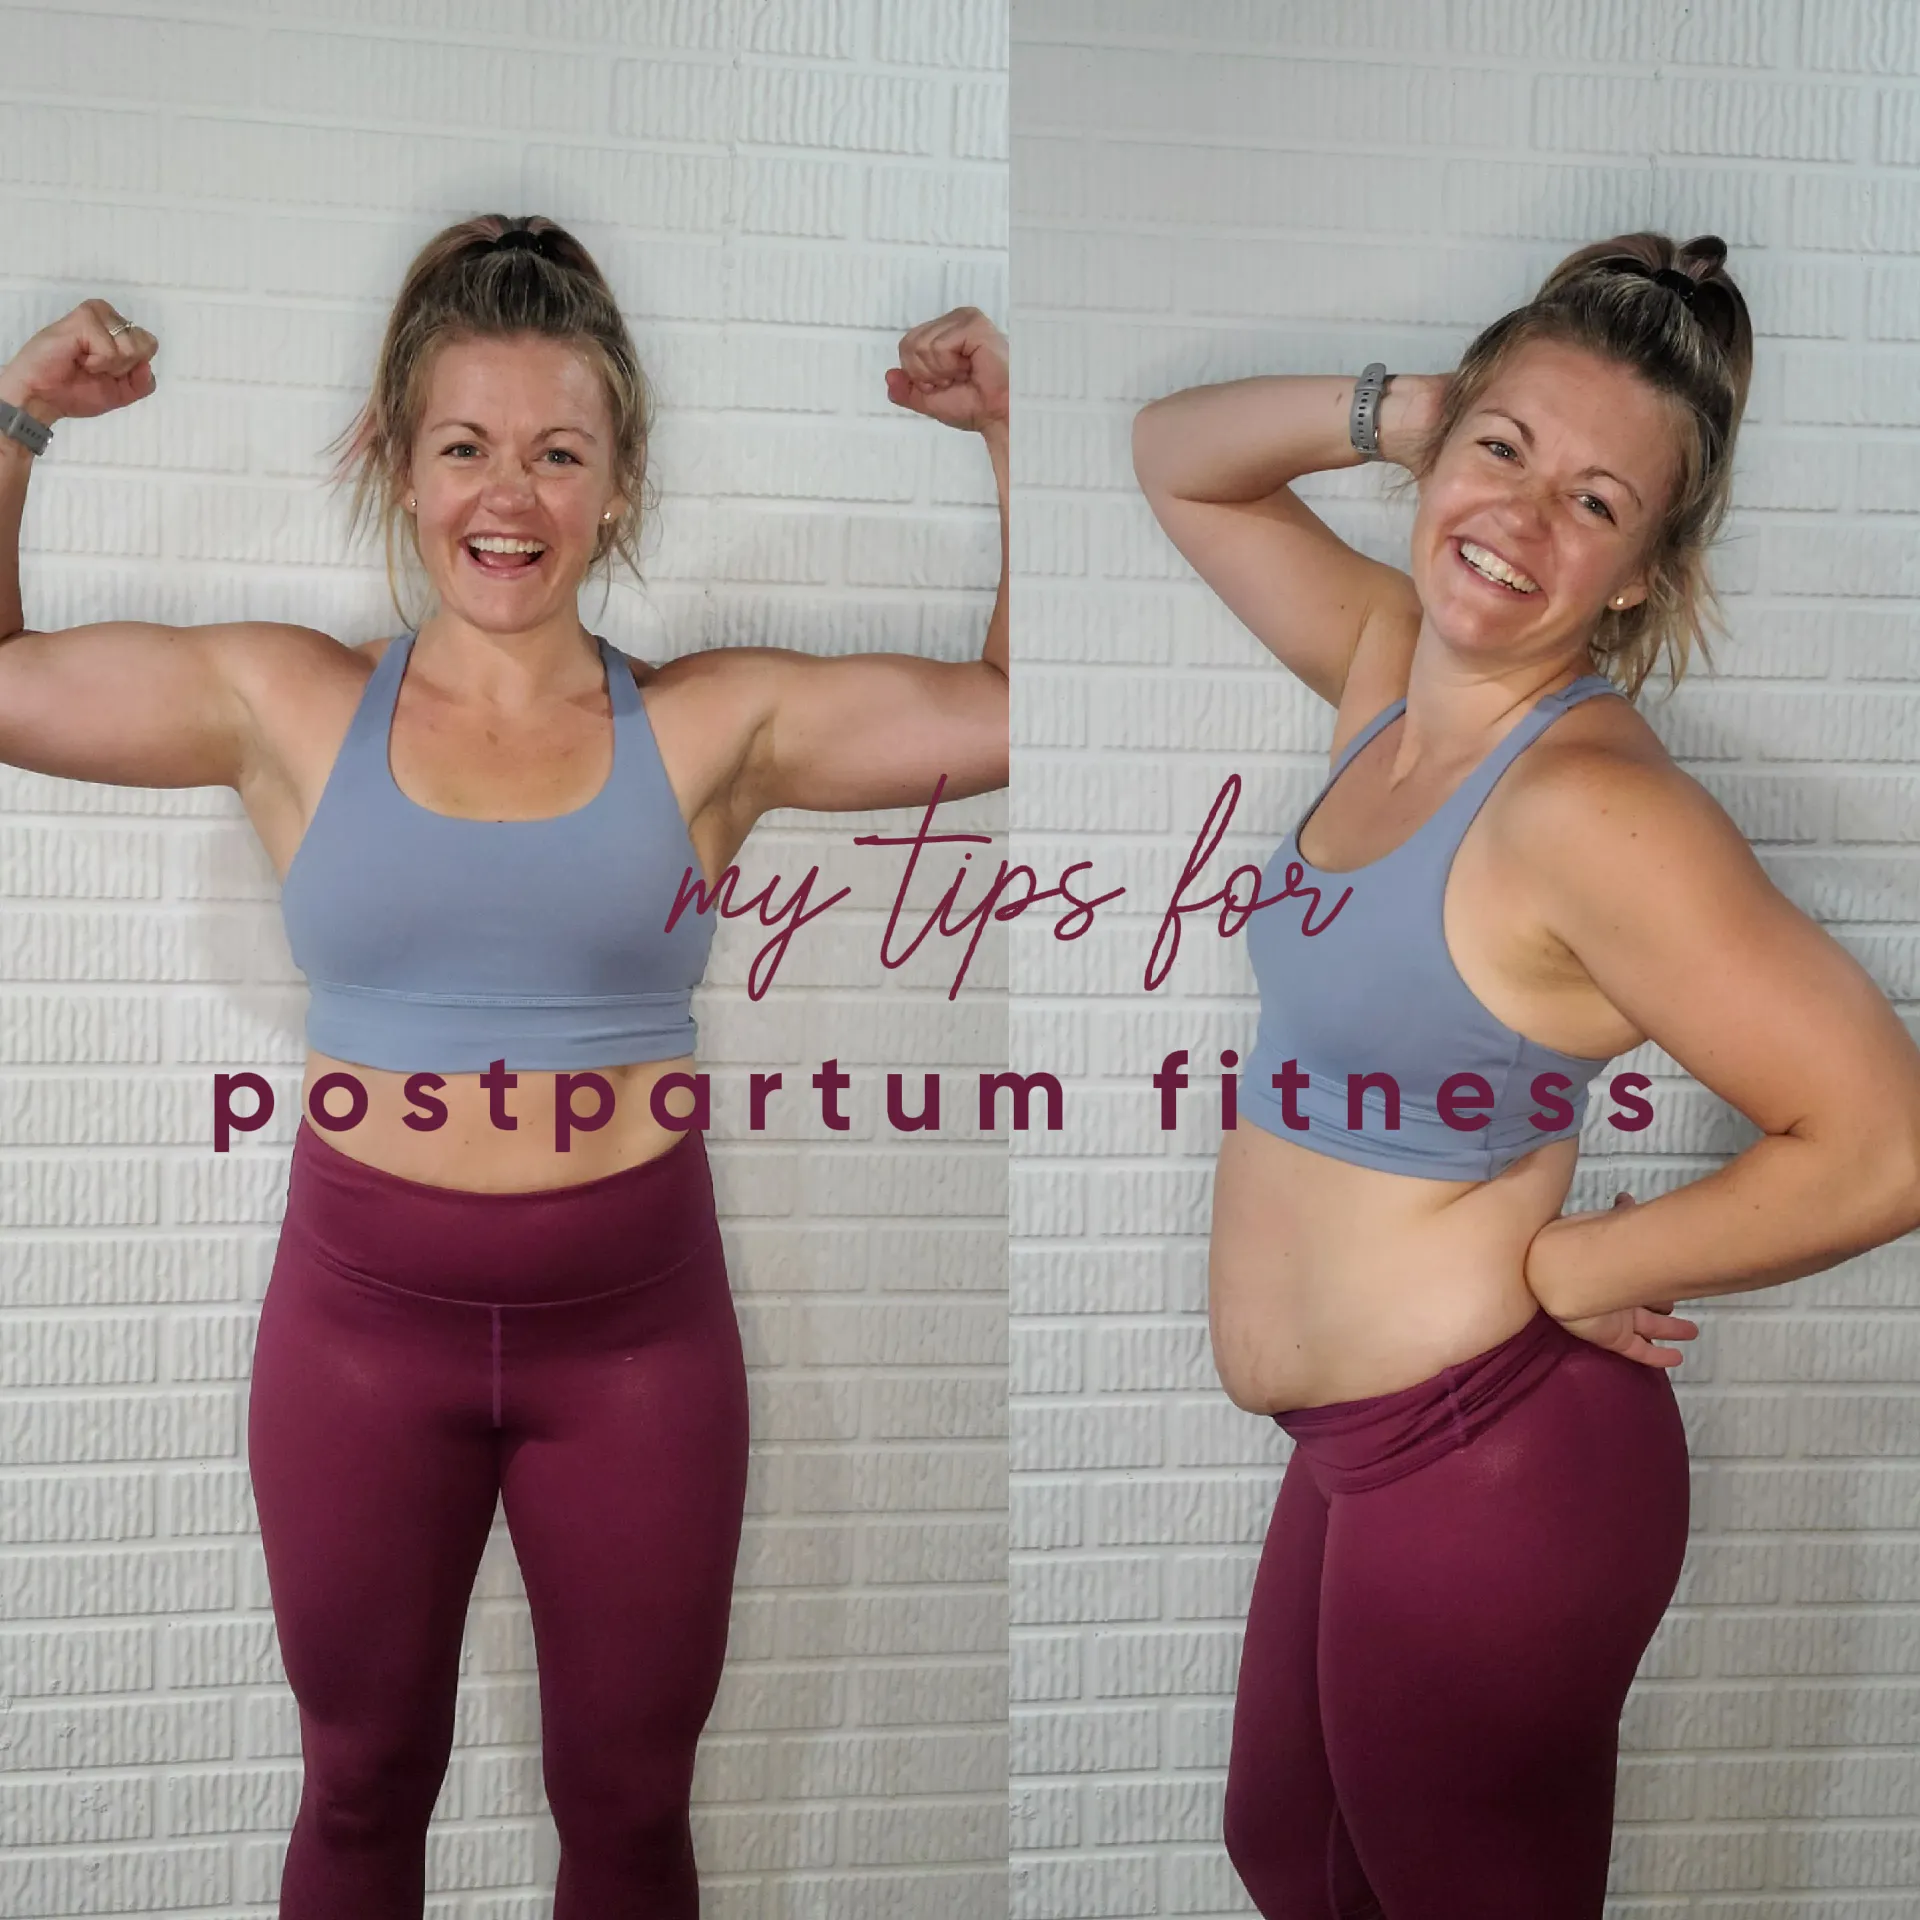 postpartum fitness inspo!, Gallery posted by Kim Stuck